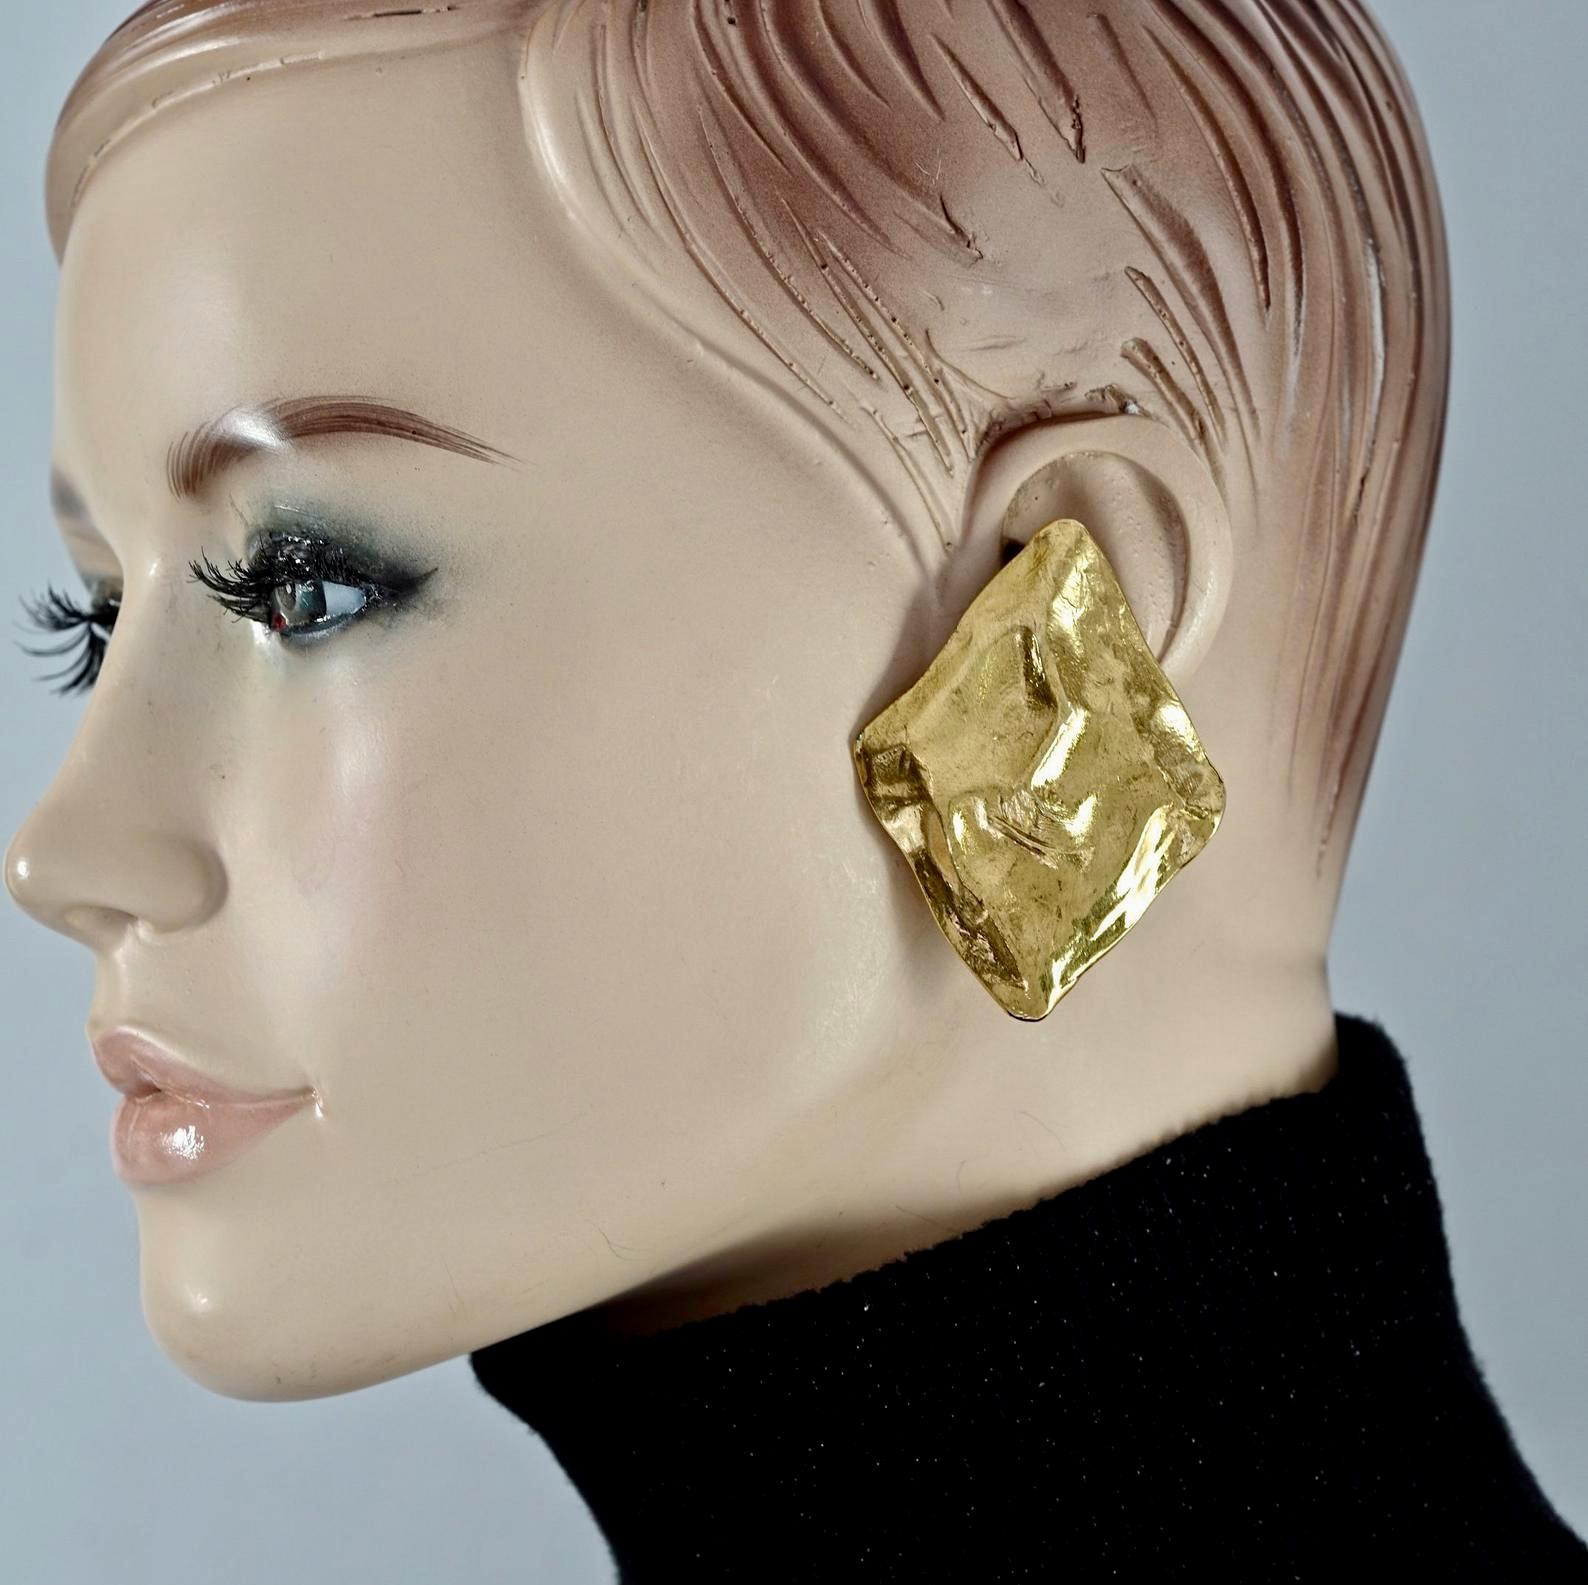 Vintage Massive YVES SAINT LAURENT Ysl Textured Diamond Shape Earrings

Measurements:
Height: 2.40 inches (6.1 cms)
Width: 1.77 inches (4.5 cms)
Weight per Earring: 25 grams

Features:
- 100% Authentic YVES SAINT LAURENT.
- Massive and textured gilt